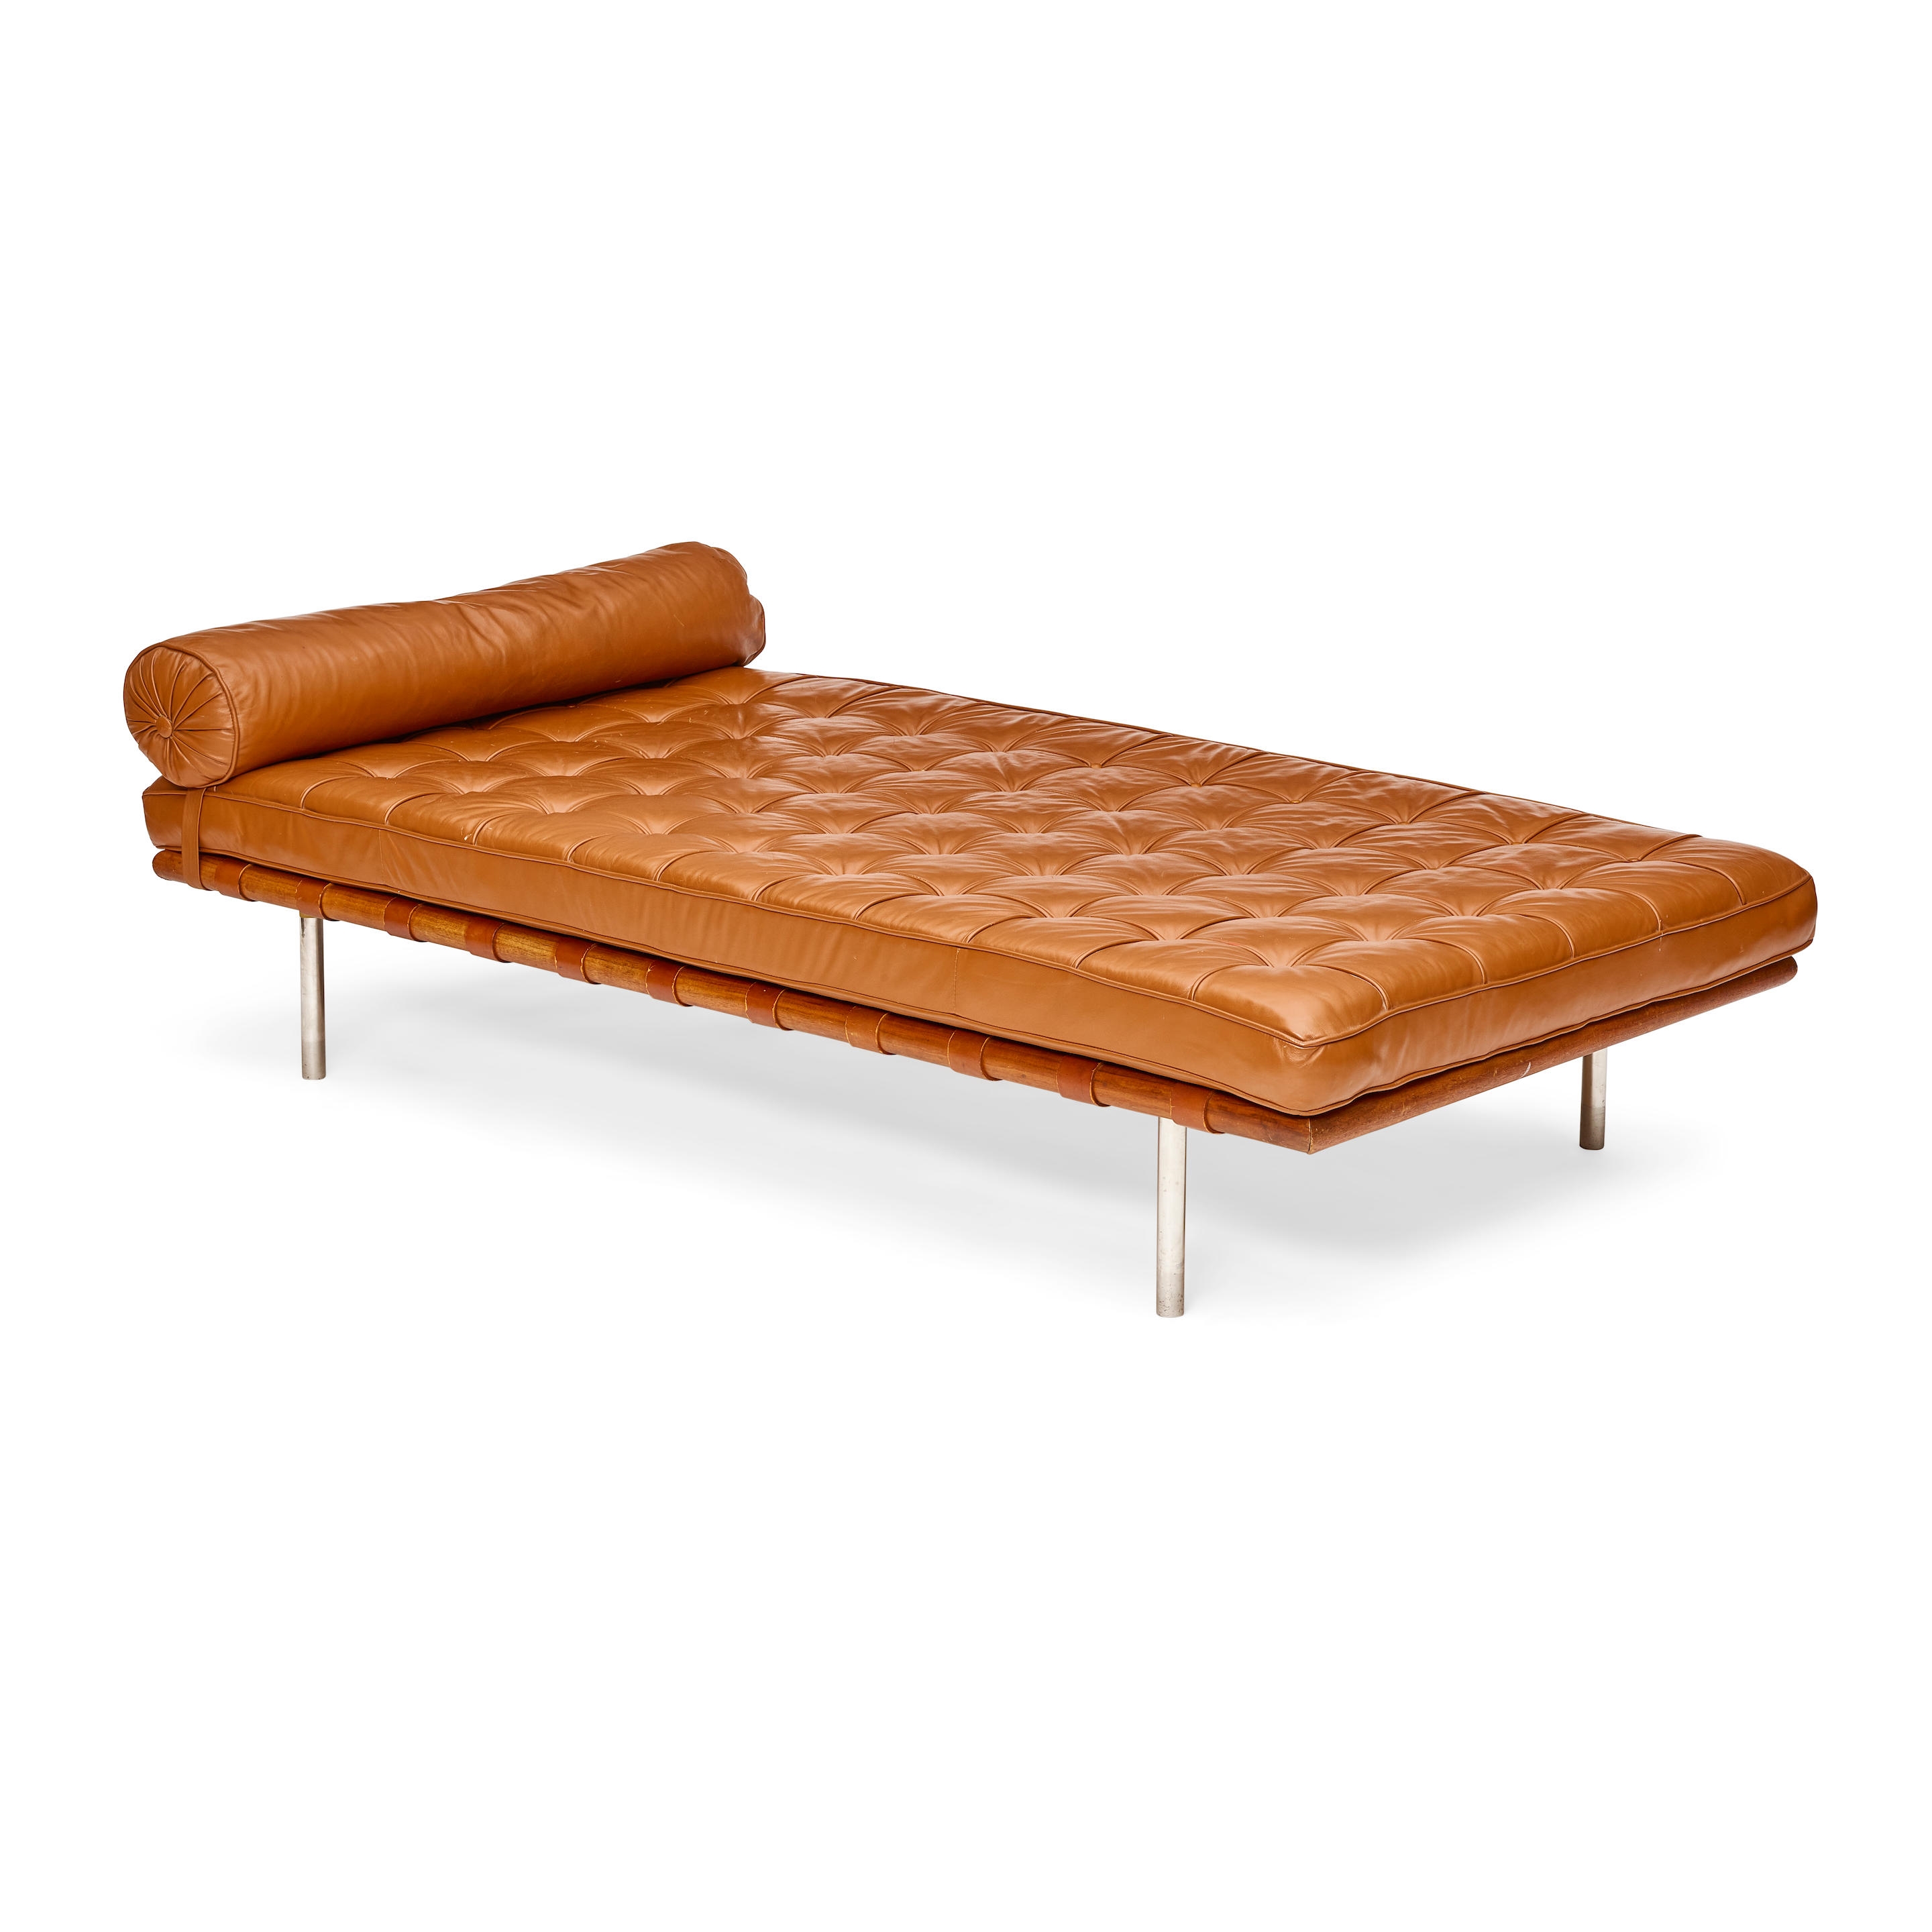 Barcelona Daybed by Ludwig Mies van der Rohe, 1960s